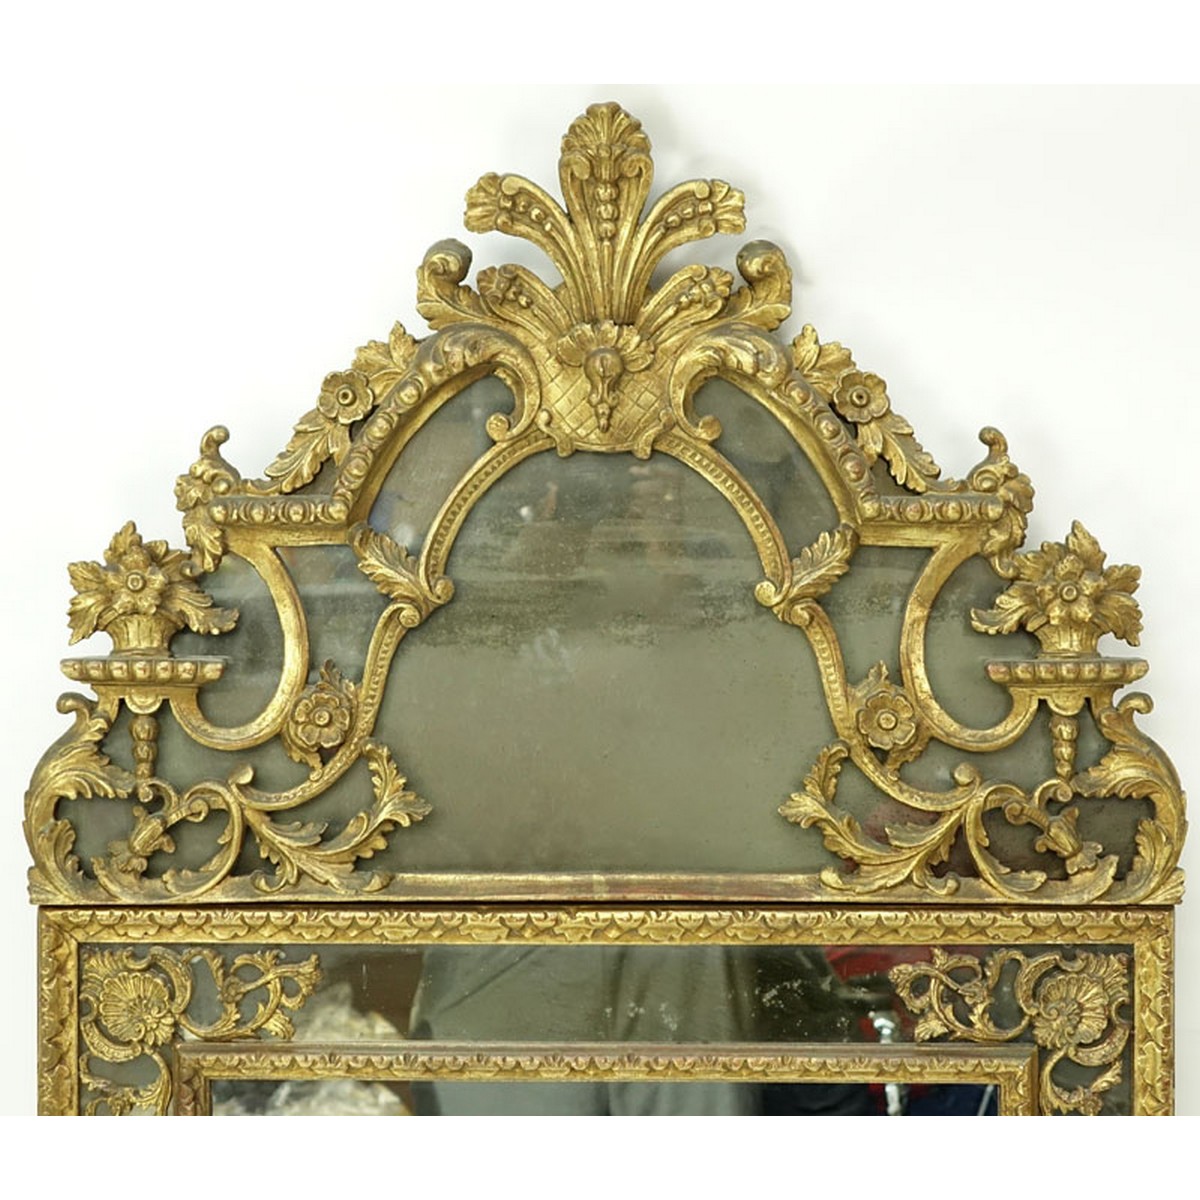 Antique French Régence Style Giltwood Carved Mirror. Ornate floral and scroll foliage to frame.